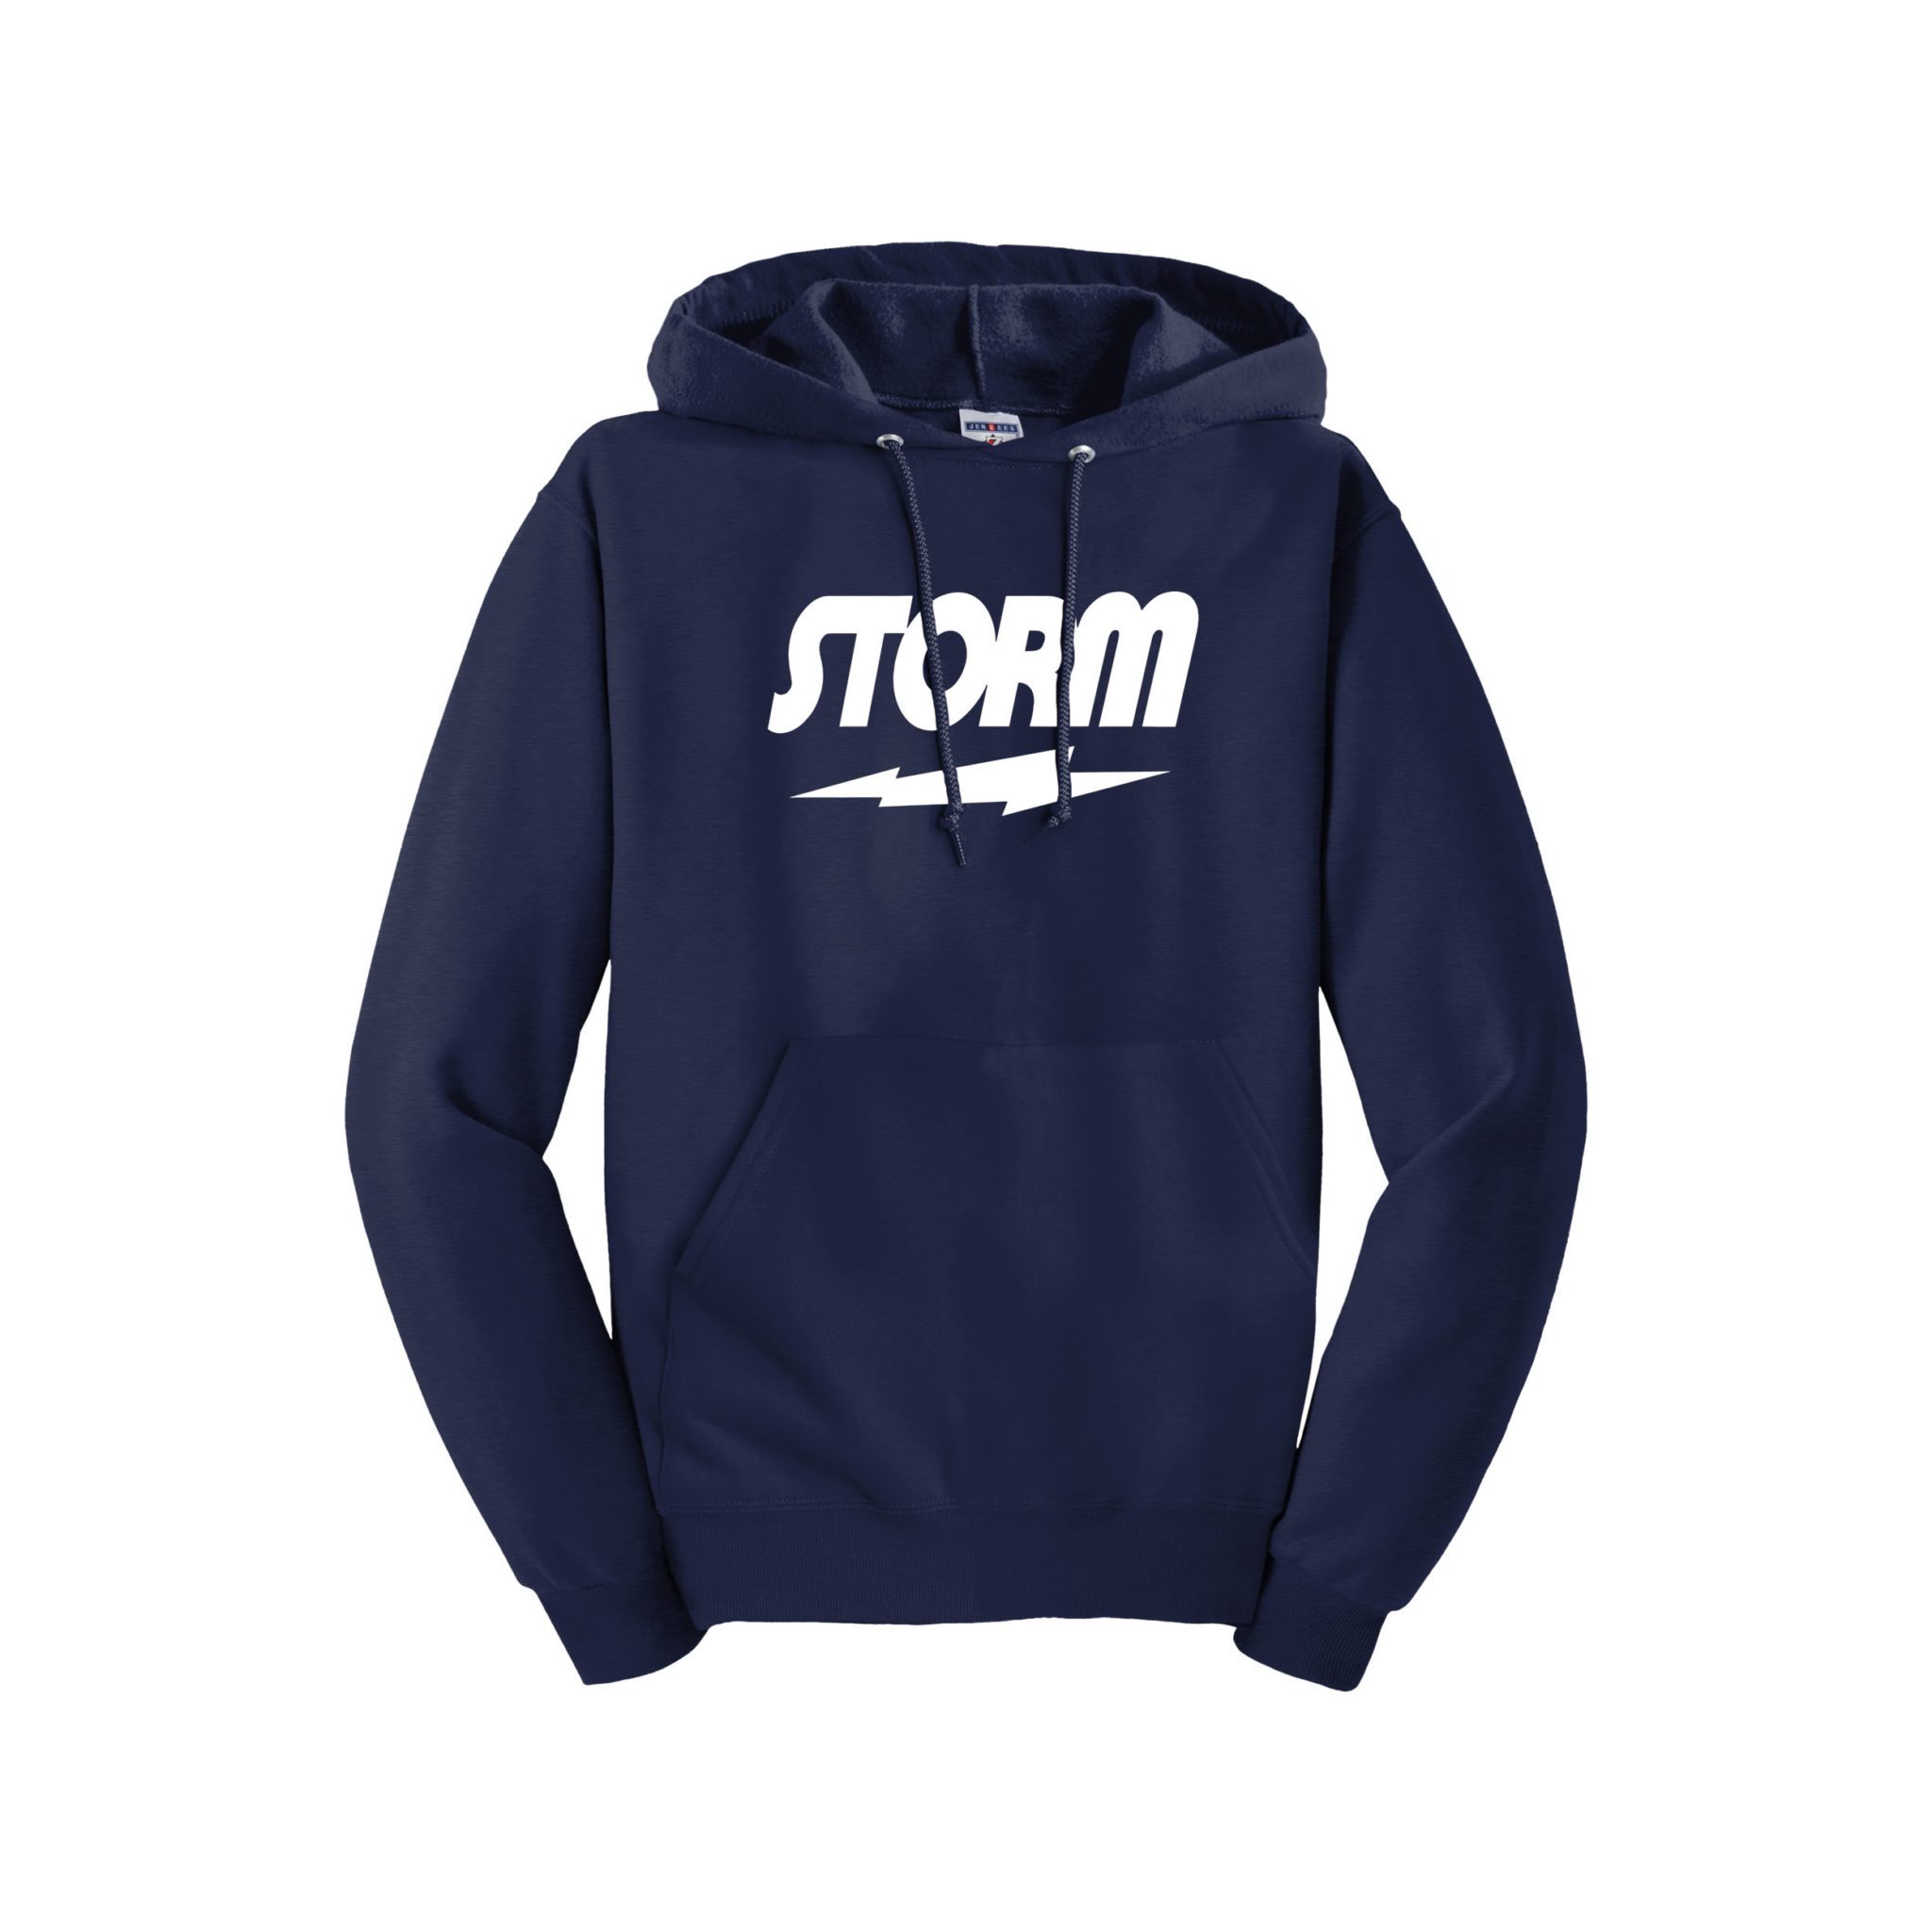 Image of Shop all Storm Hoodies!